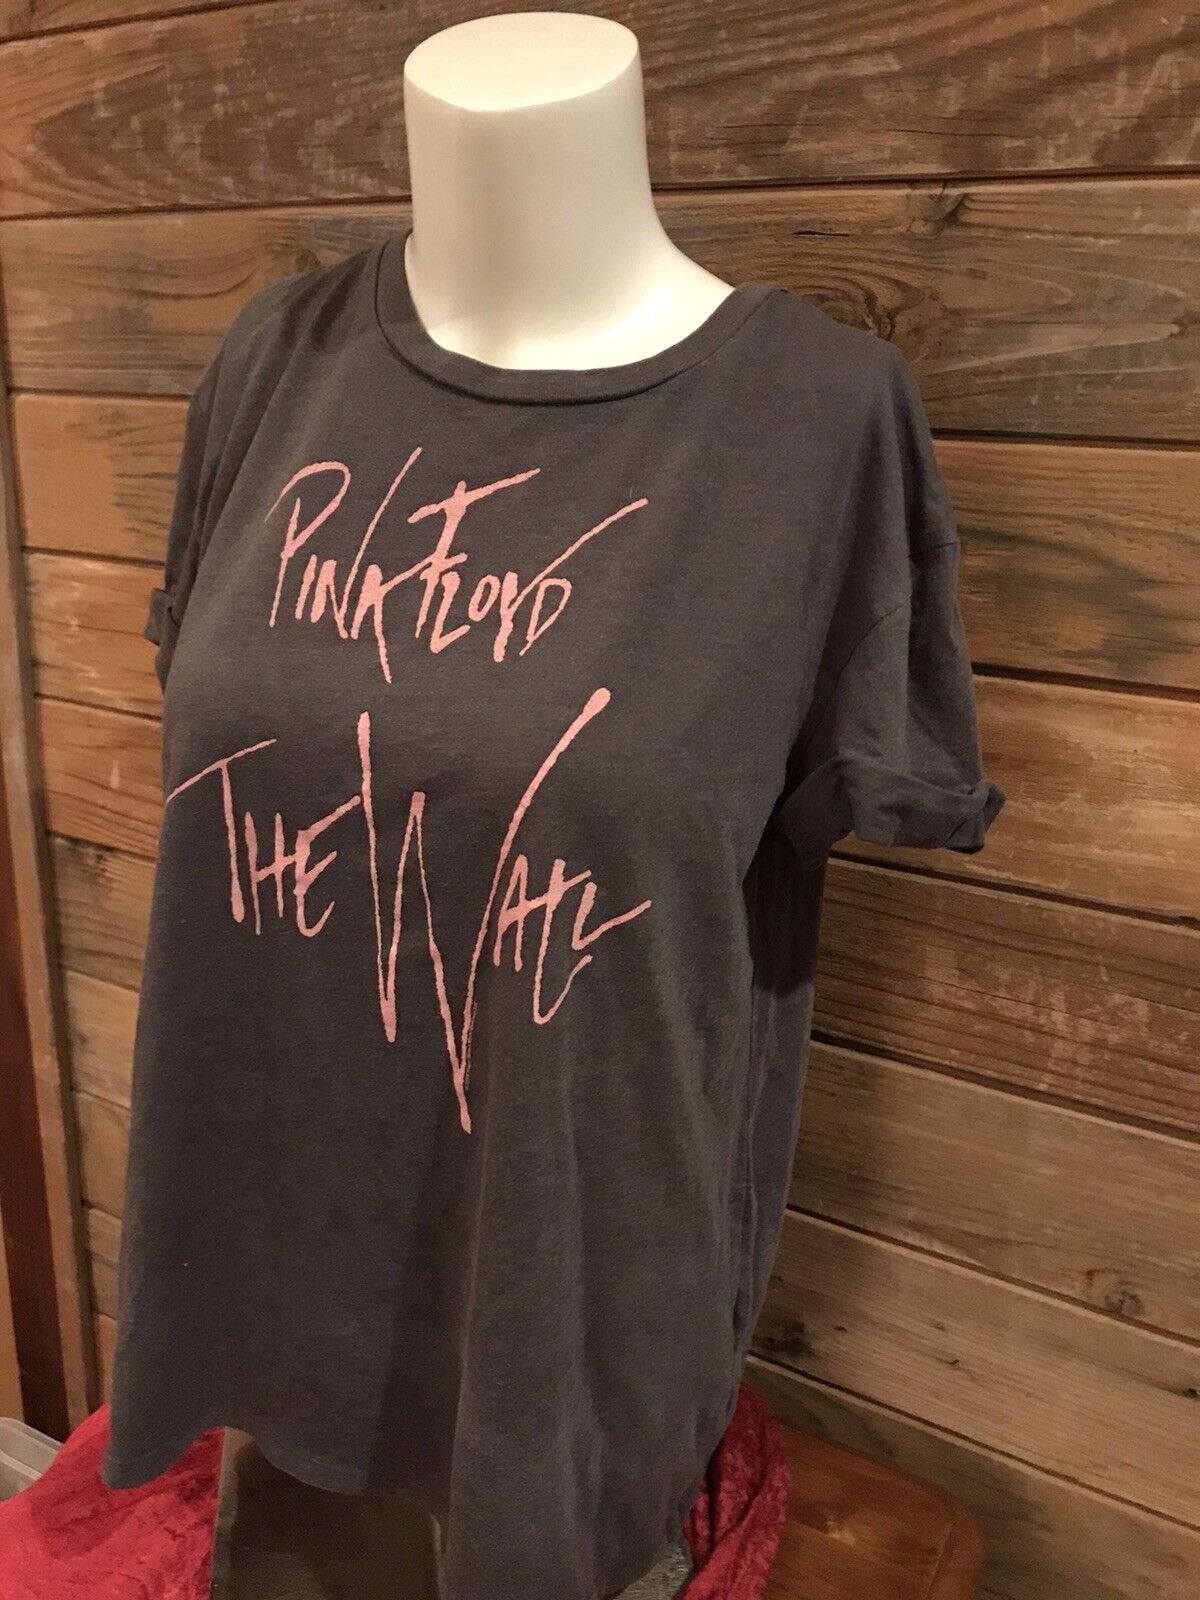 Pink Floyd The Wall Women's Oversized Large Grey T-shirt Roger W